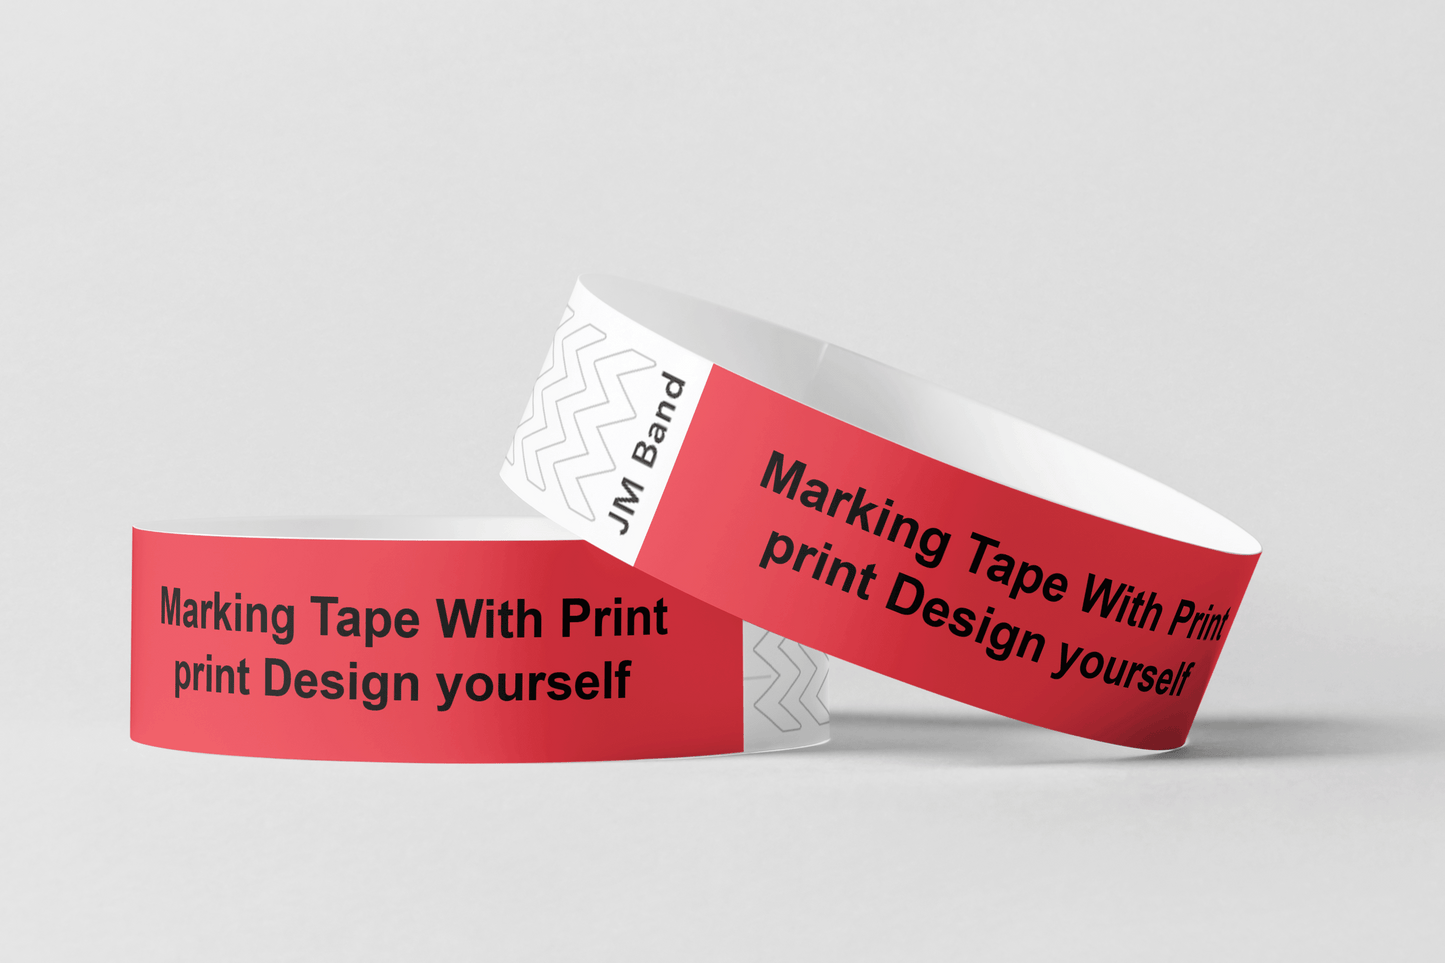 Marking Tape With Print Paper wristbands JM Band UK 10 Red 